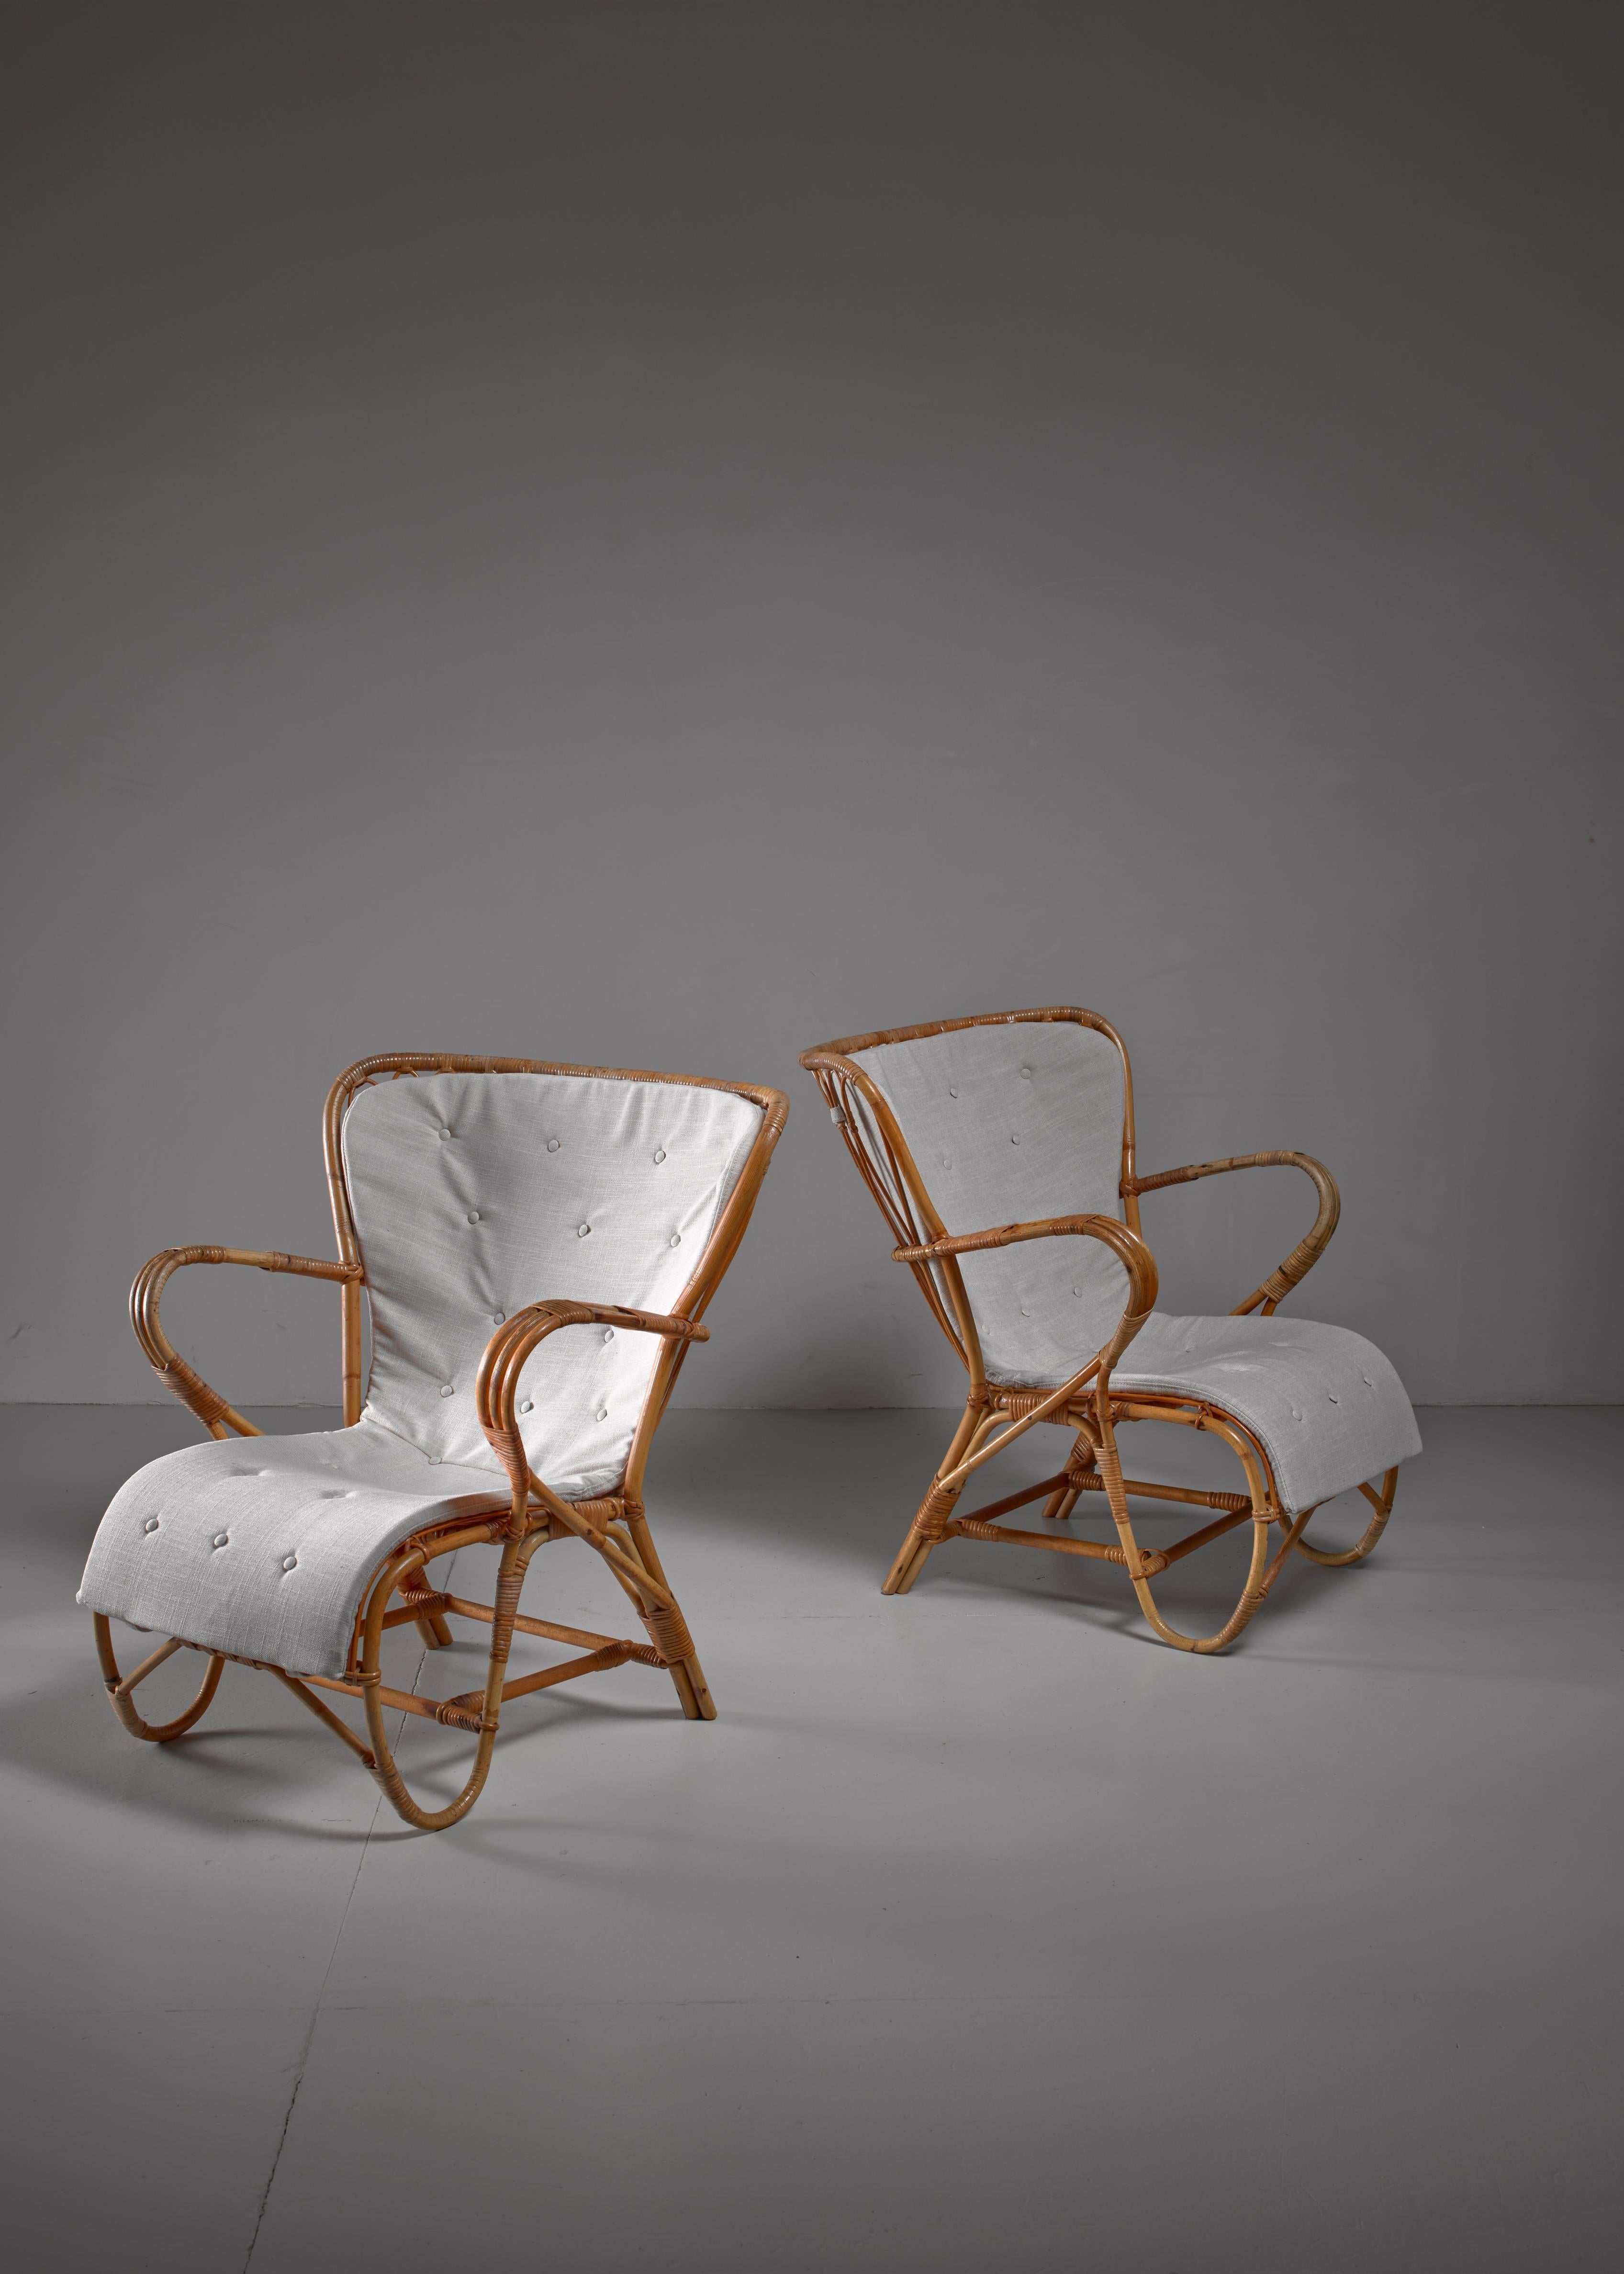 A pair of Finnish outdoor lounge chairs by Reijo Reijonen, made of bamboo and rattan. The chairs have off-white fabric cushions, custom-made in our in-house atelier.
These chairs are offered to you by Bloomberry, Amsterdam.